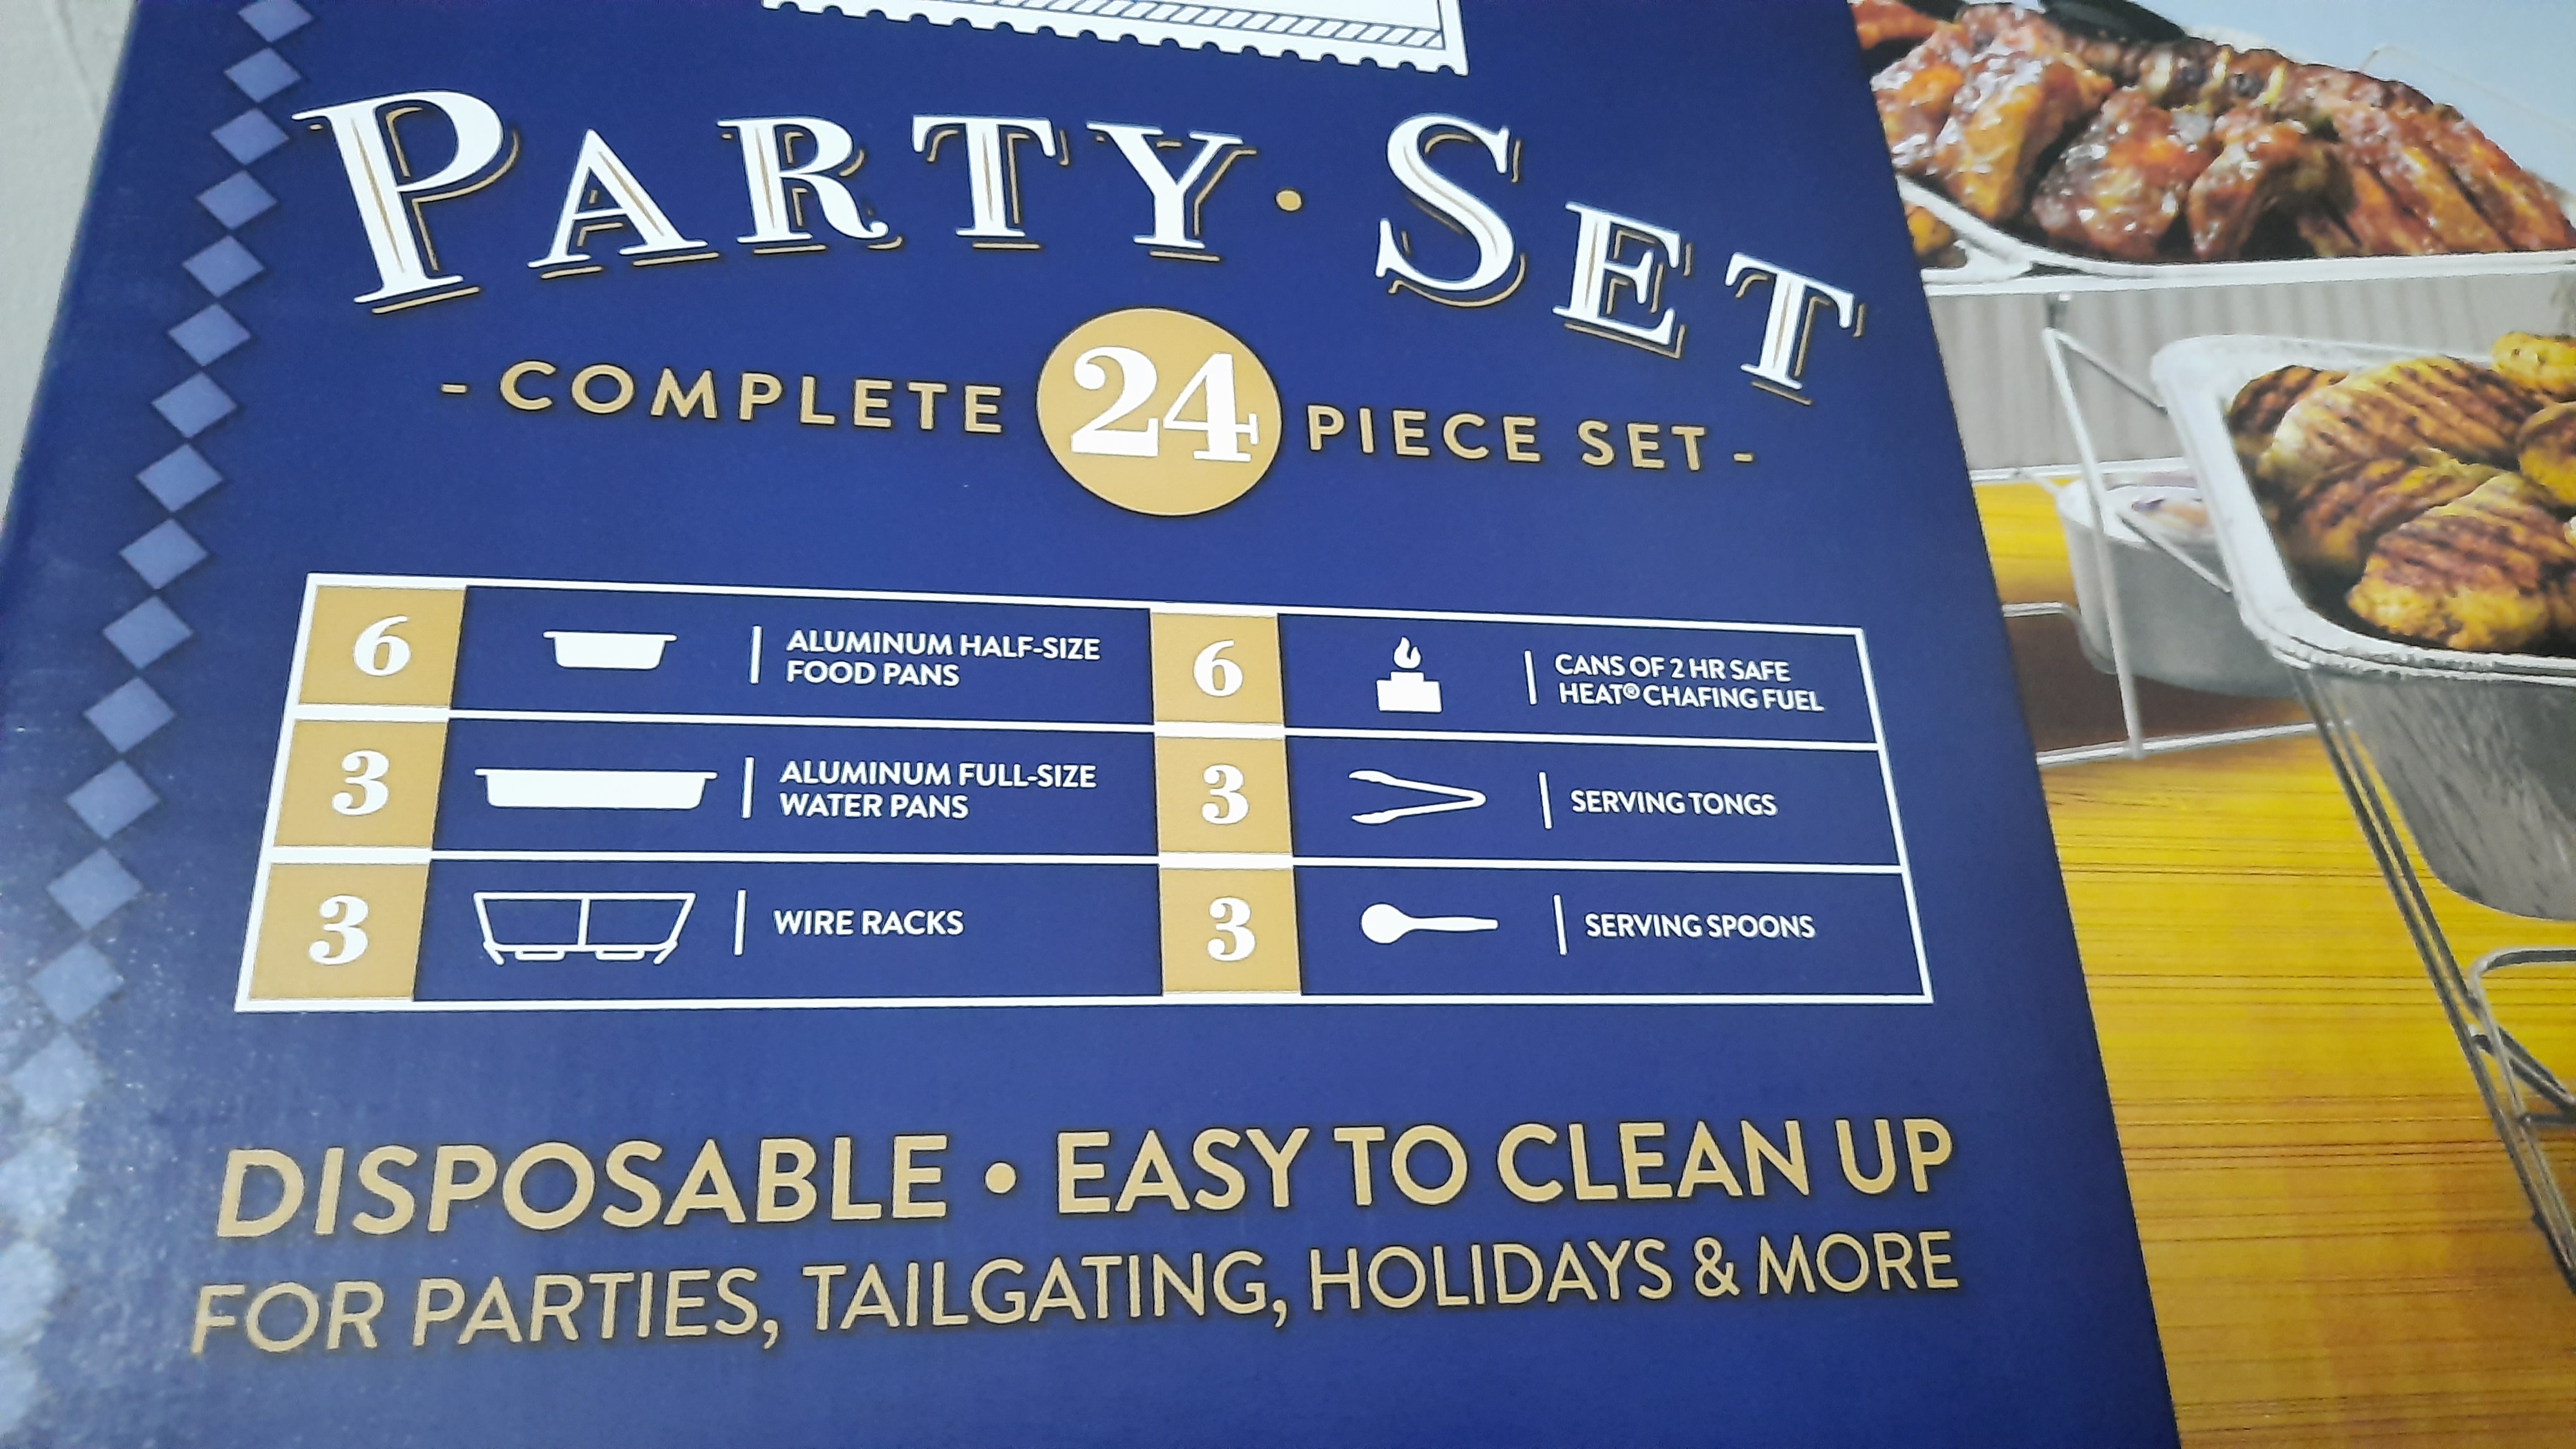 Member's Mark Party Set with Safe Heat Chafing Fuel (24 Piece) 